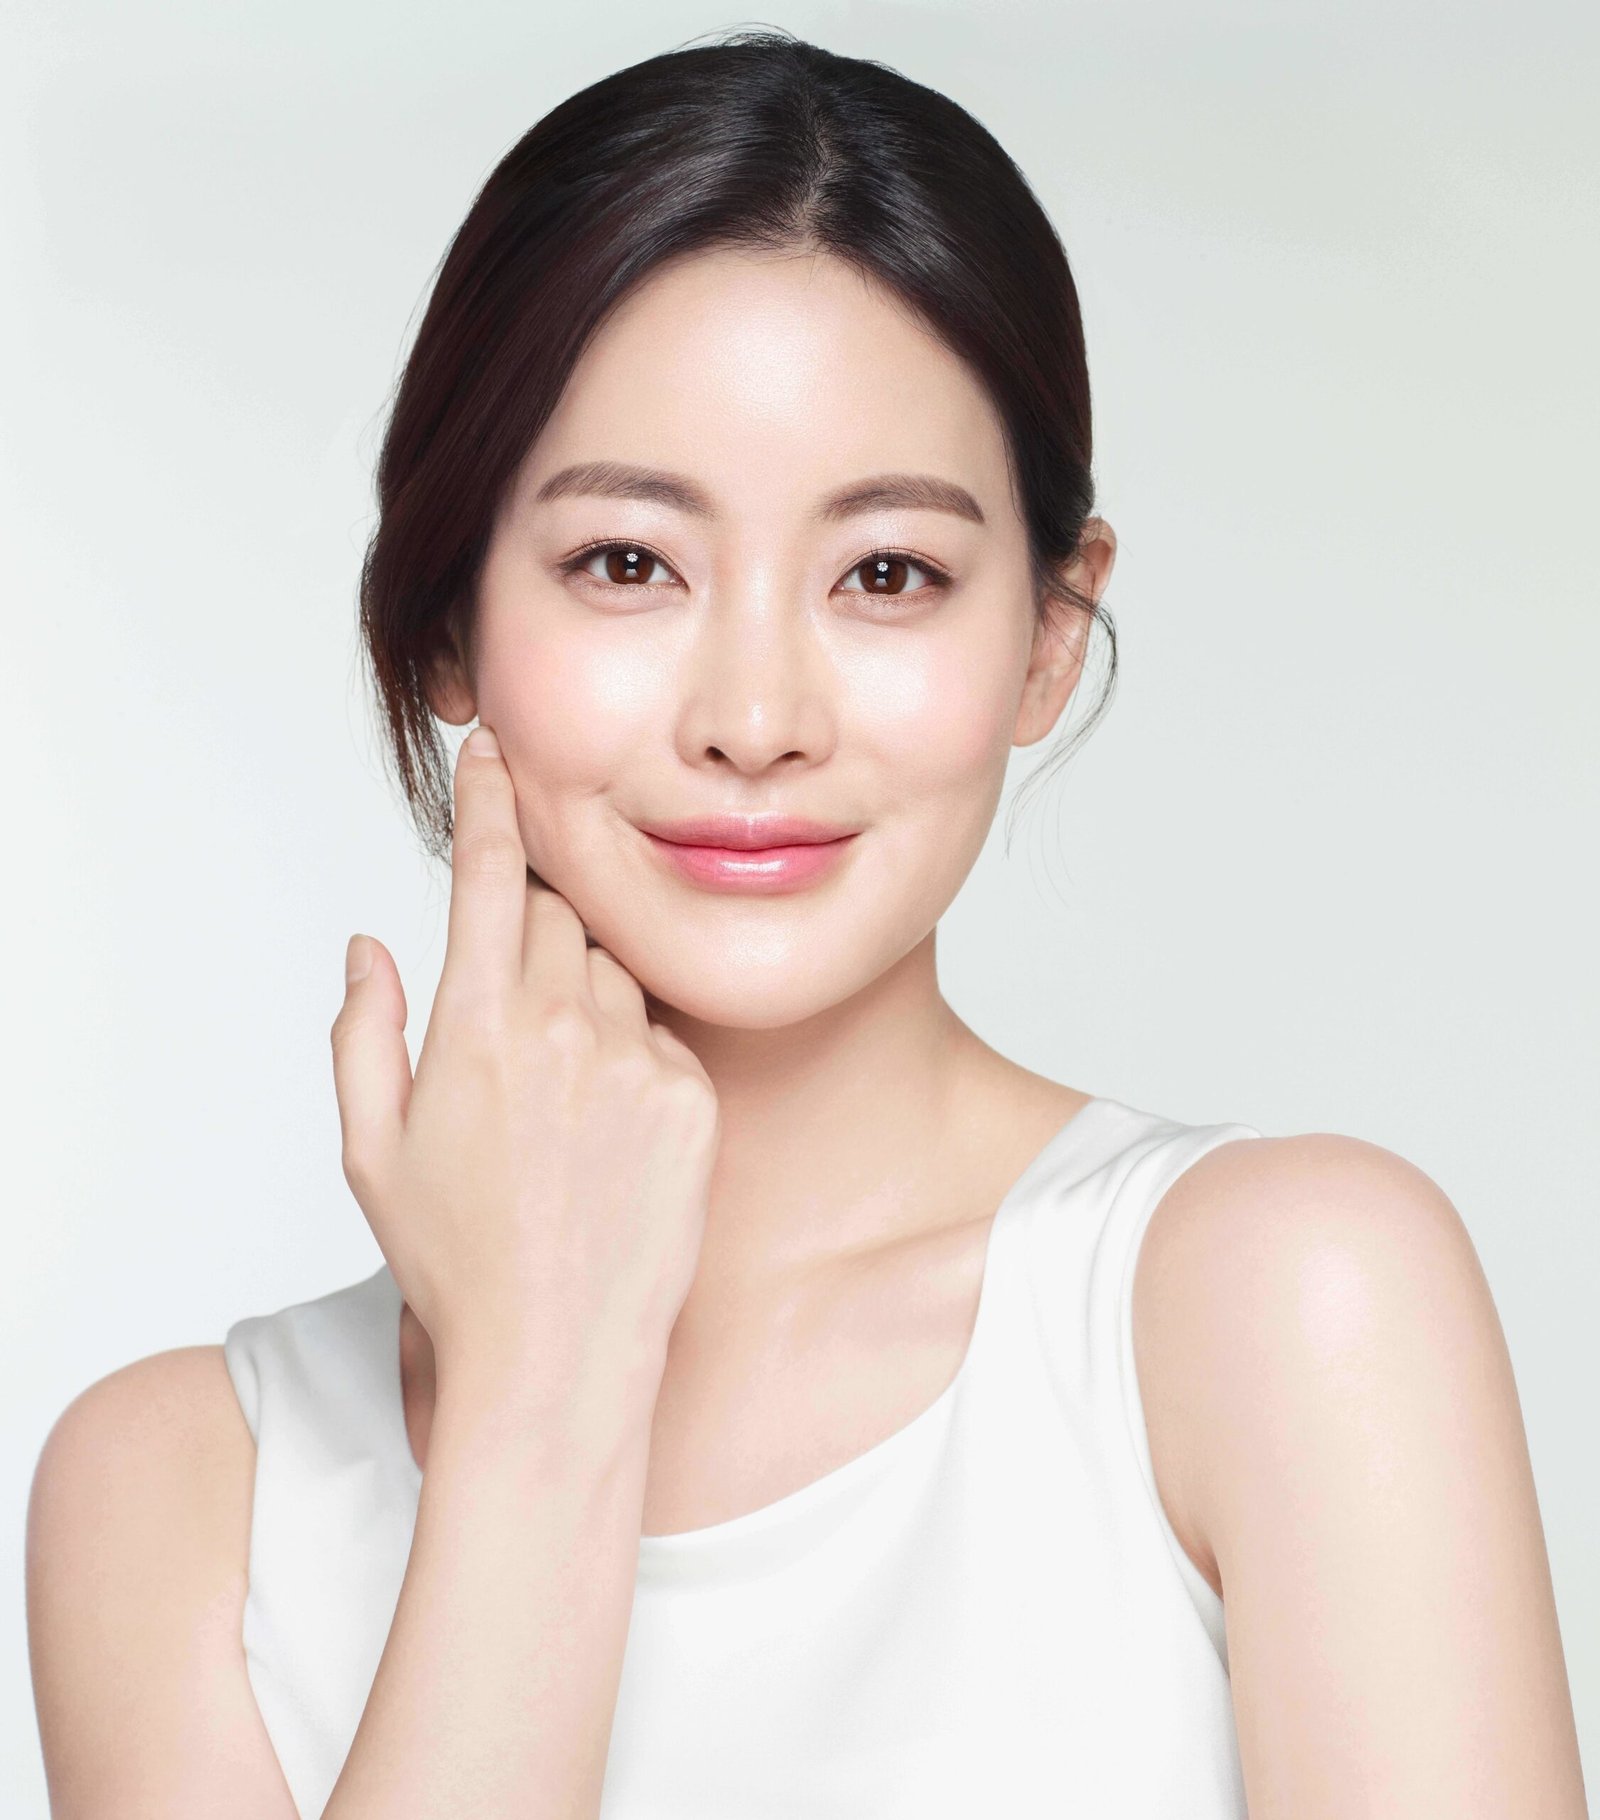 The Famous Korean 10 step skincare routine is here!